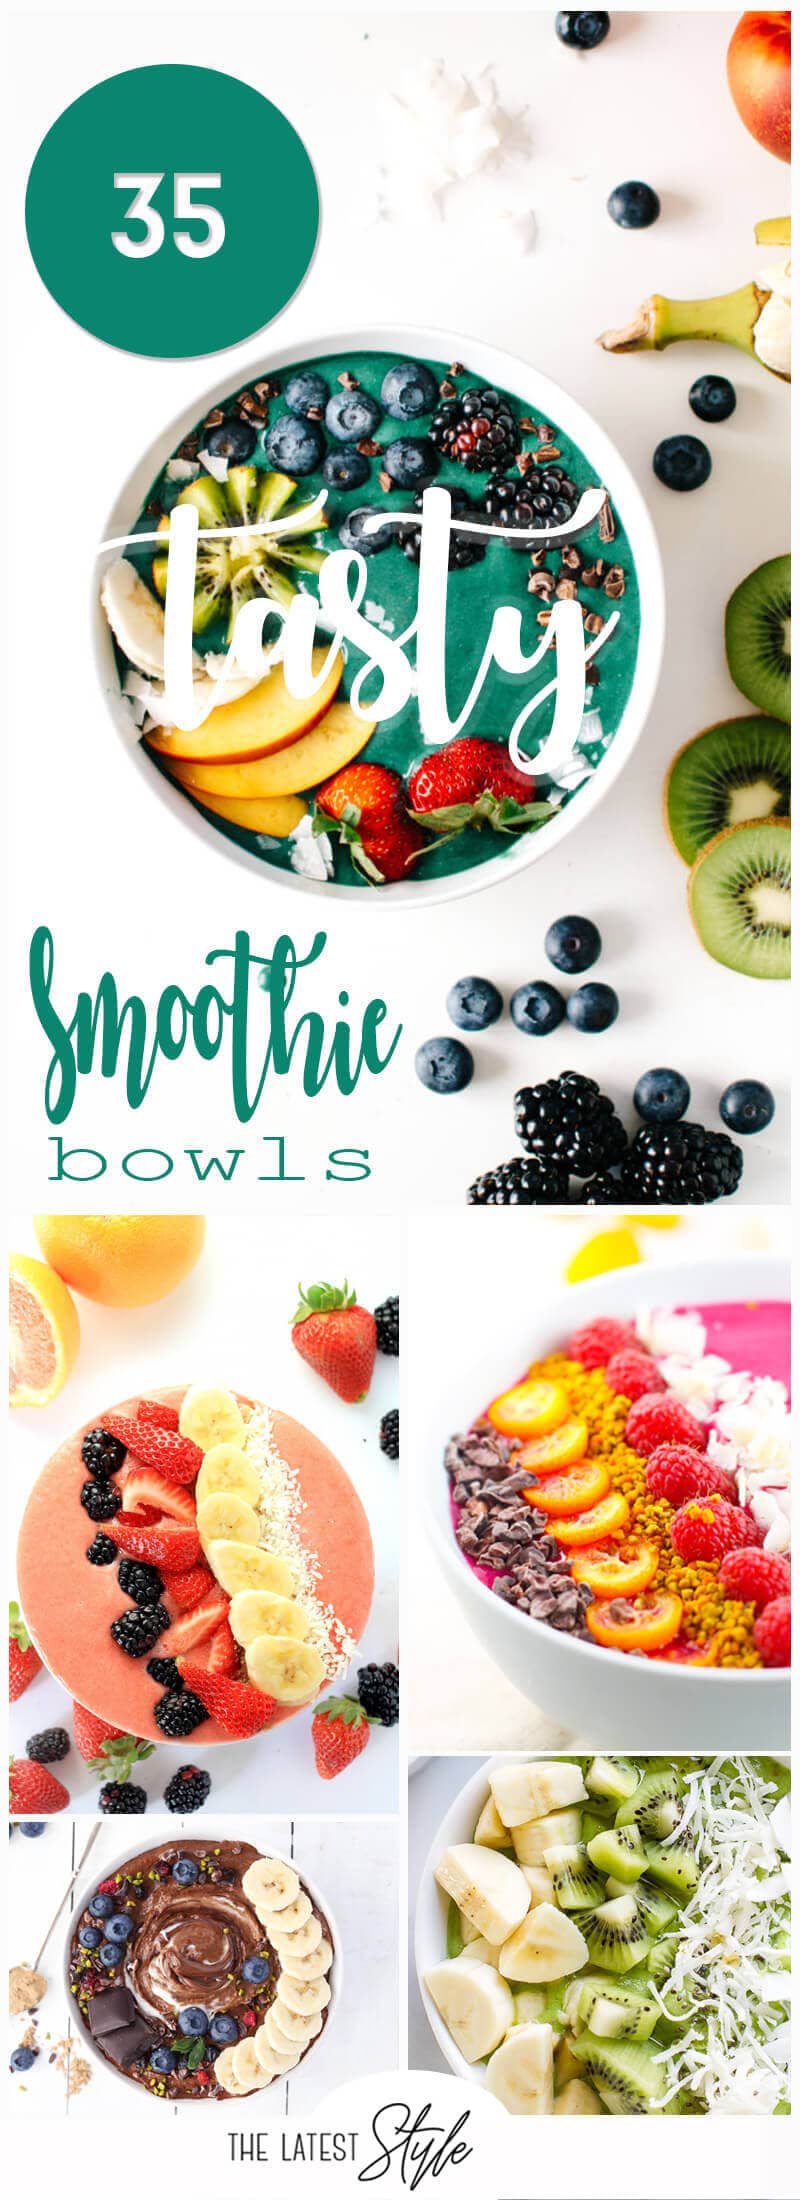 35 Tasty Smoothie Bowl Recipes that You can Easily Make at Home